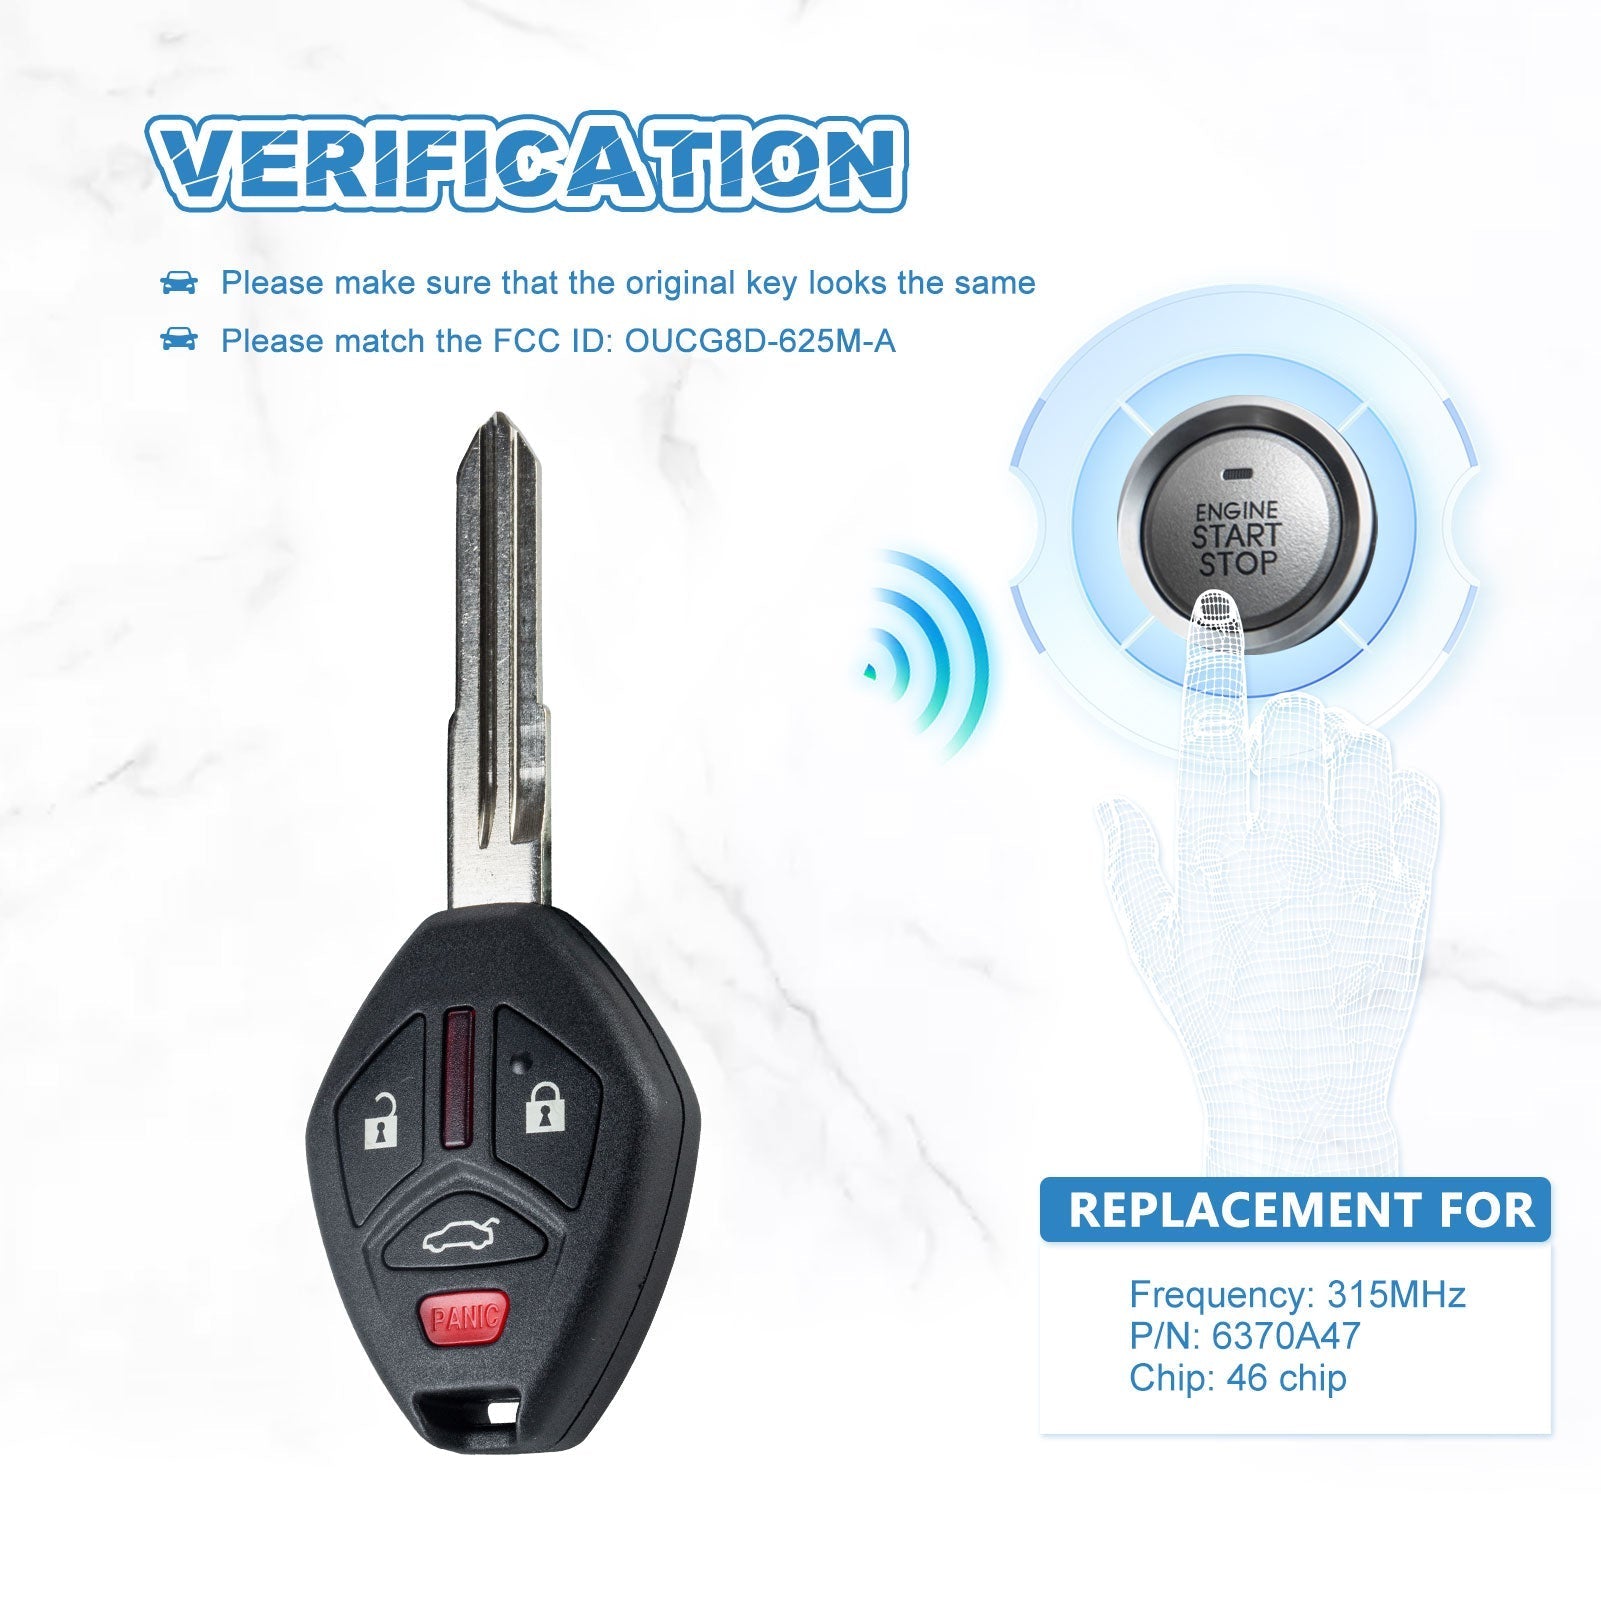 315MHz Car Key Fob Keyless Entry Control Replacement for 2007-2018 Mitsubishi Lancer OUCG8D-625M-A  KR-M4SD-10